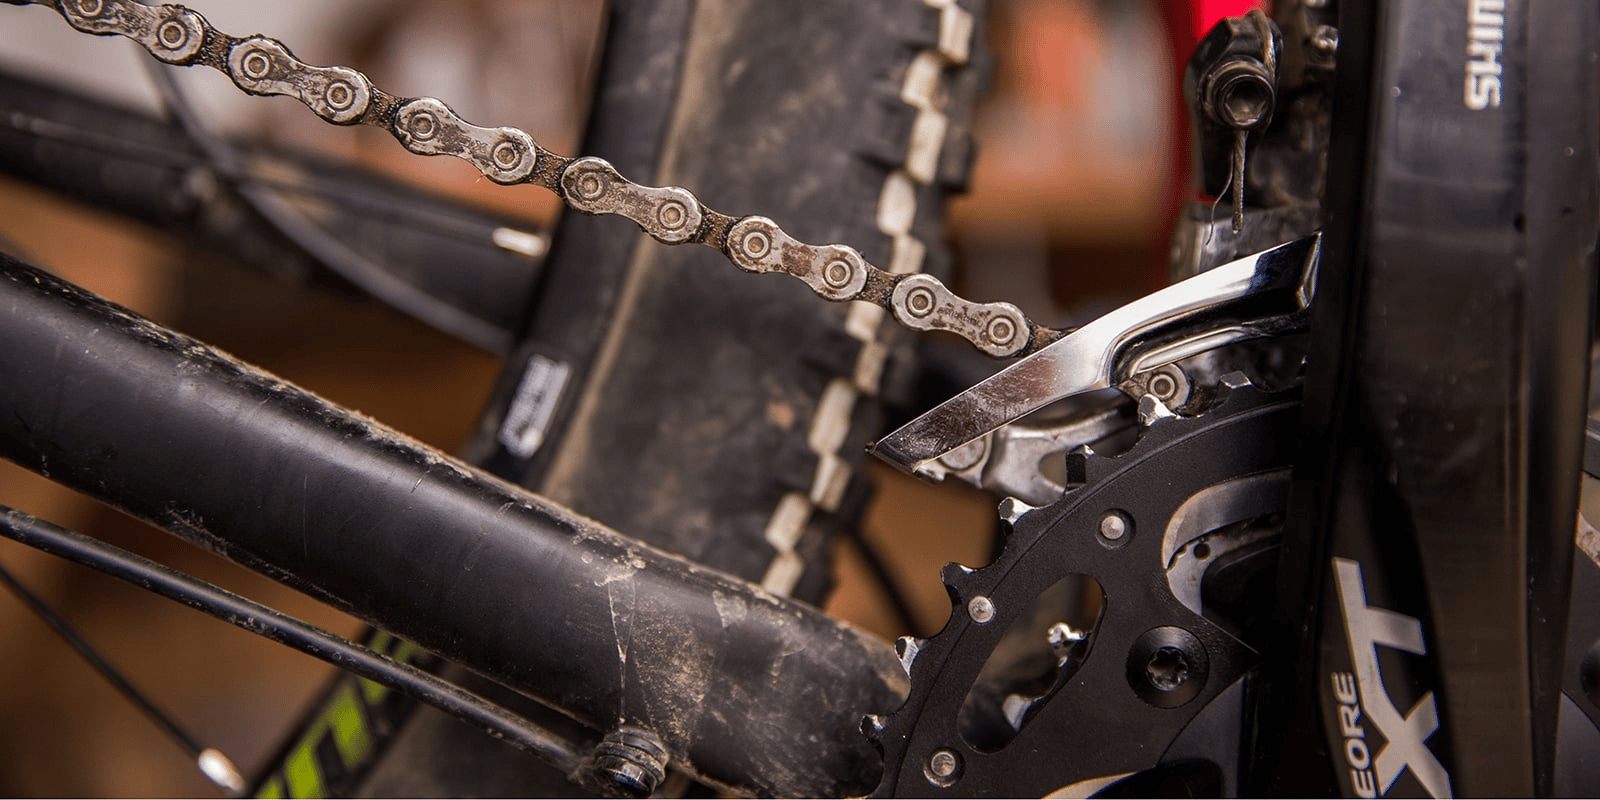 To fix a mountain bike chain rubbing the front derailleur, first understand what the correct setup looks like. A derailleur’s main function is to move the bike’s chain over the cassette.